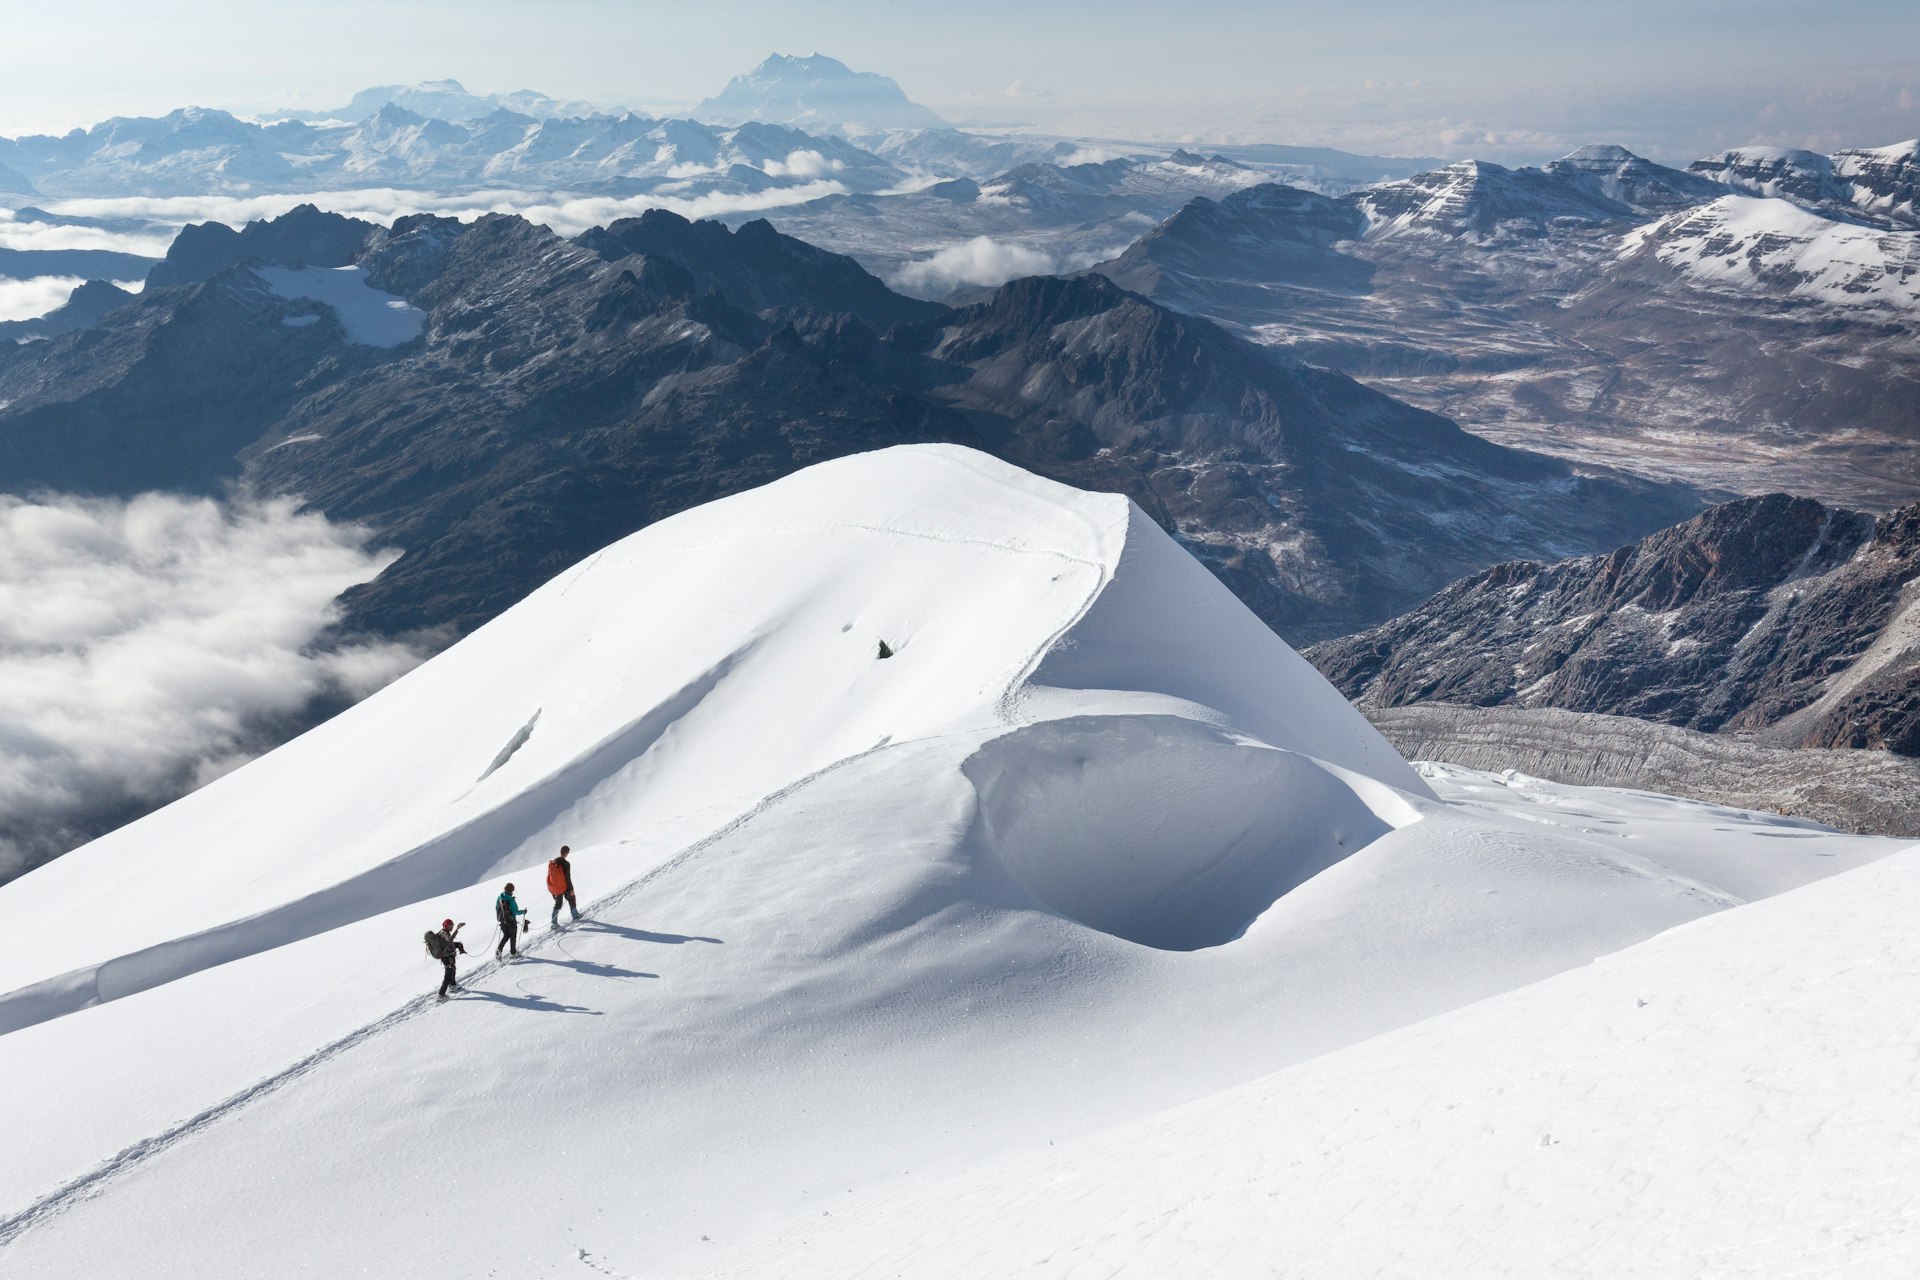 Three mountaineers on a snow ridge with cloud-covered mountains below, near or on Huayna Potosí